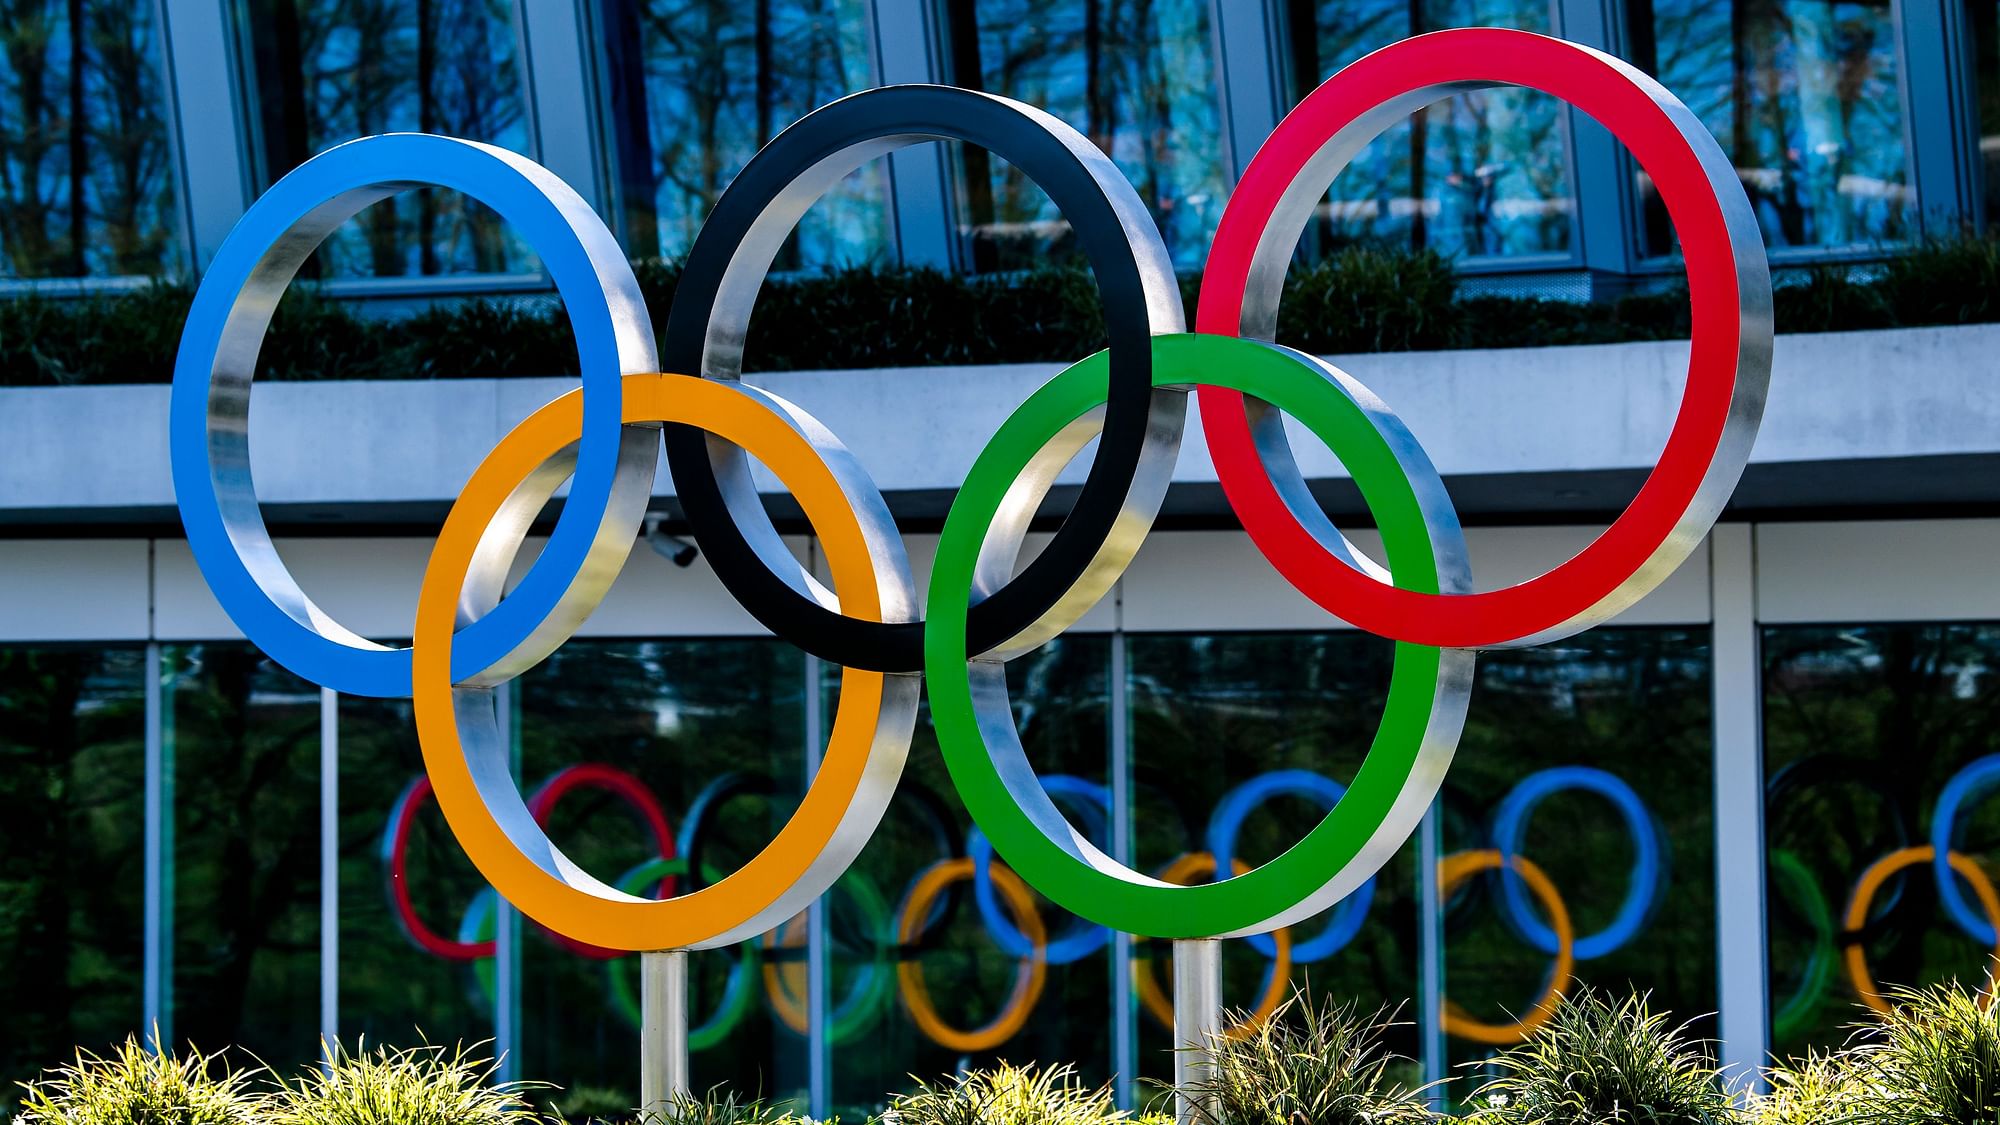 The postponed Olympic Games will run from 23 July to 8 August 2021.